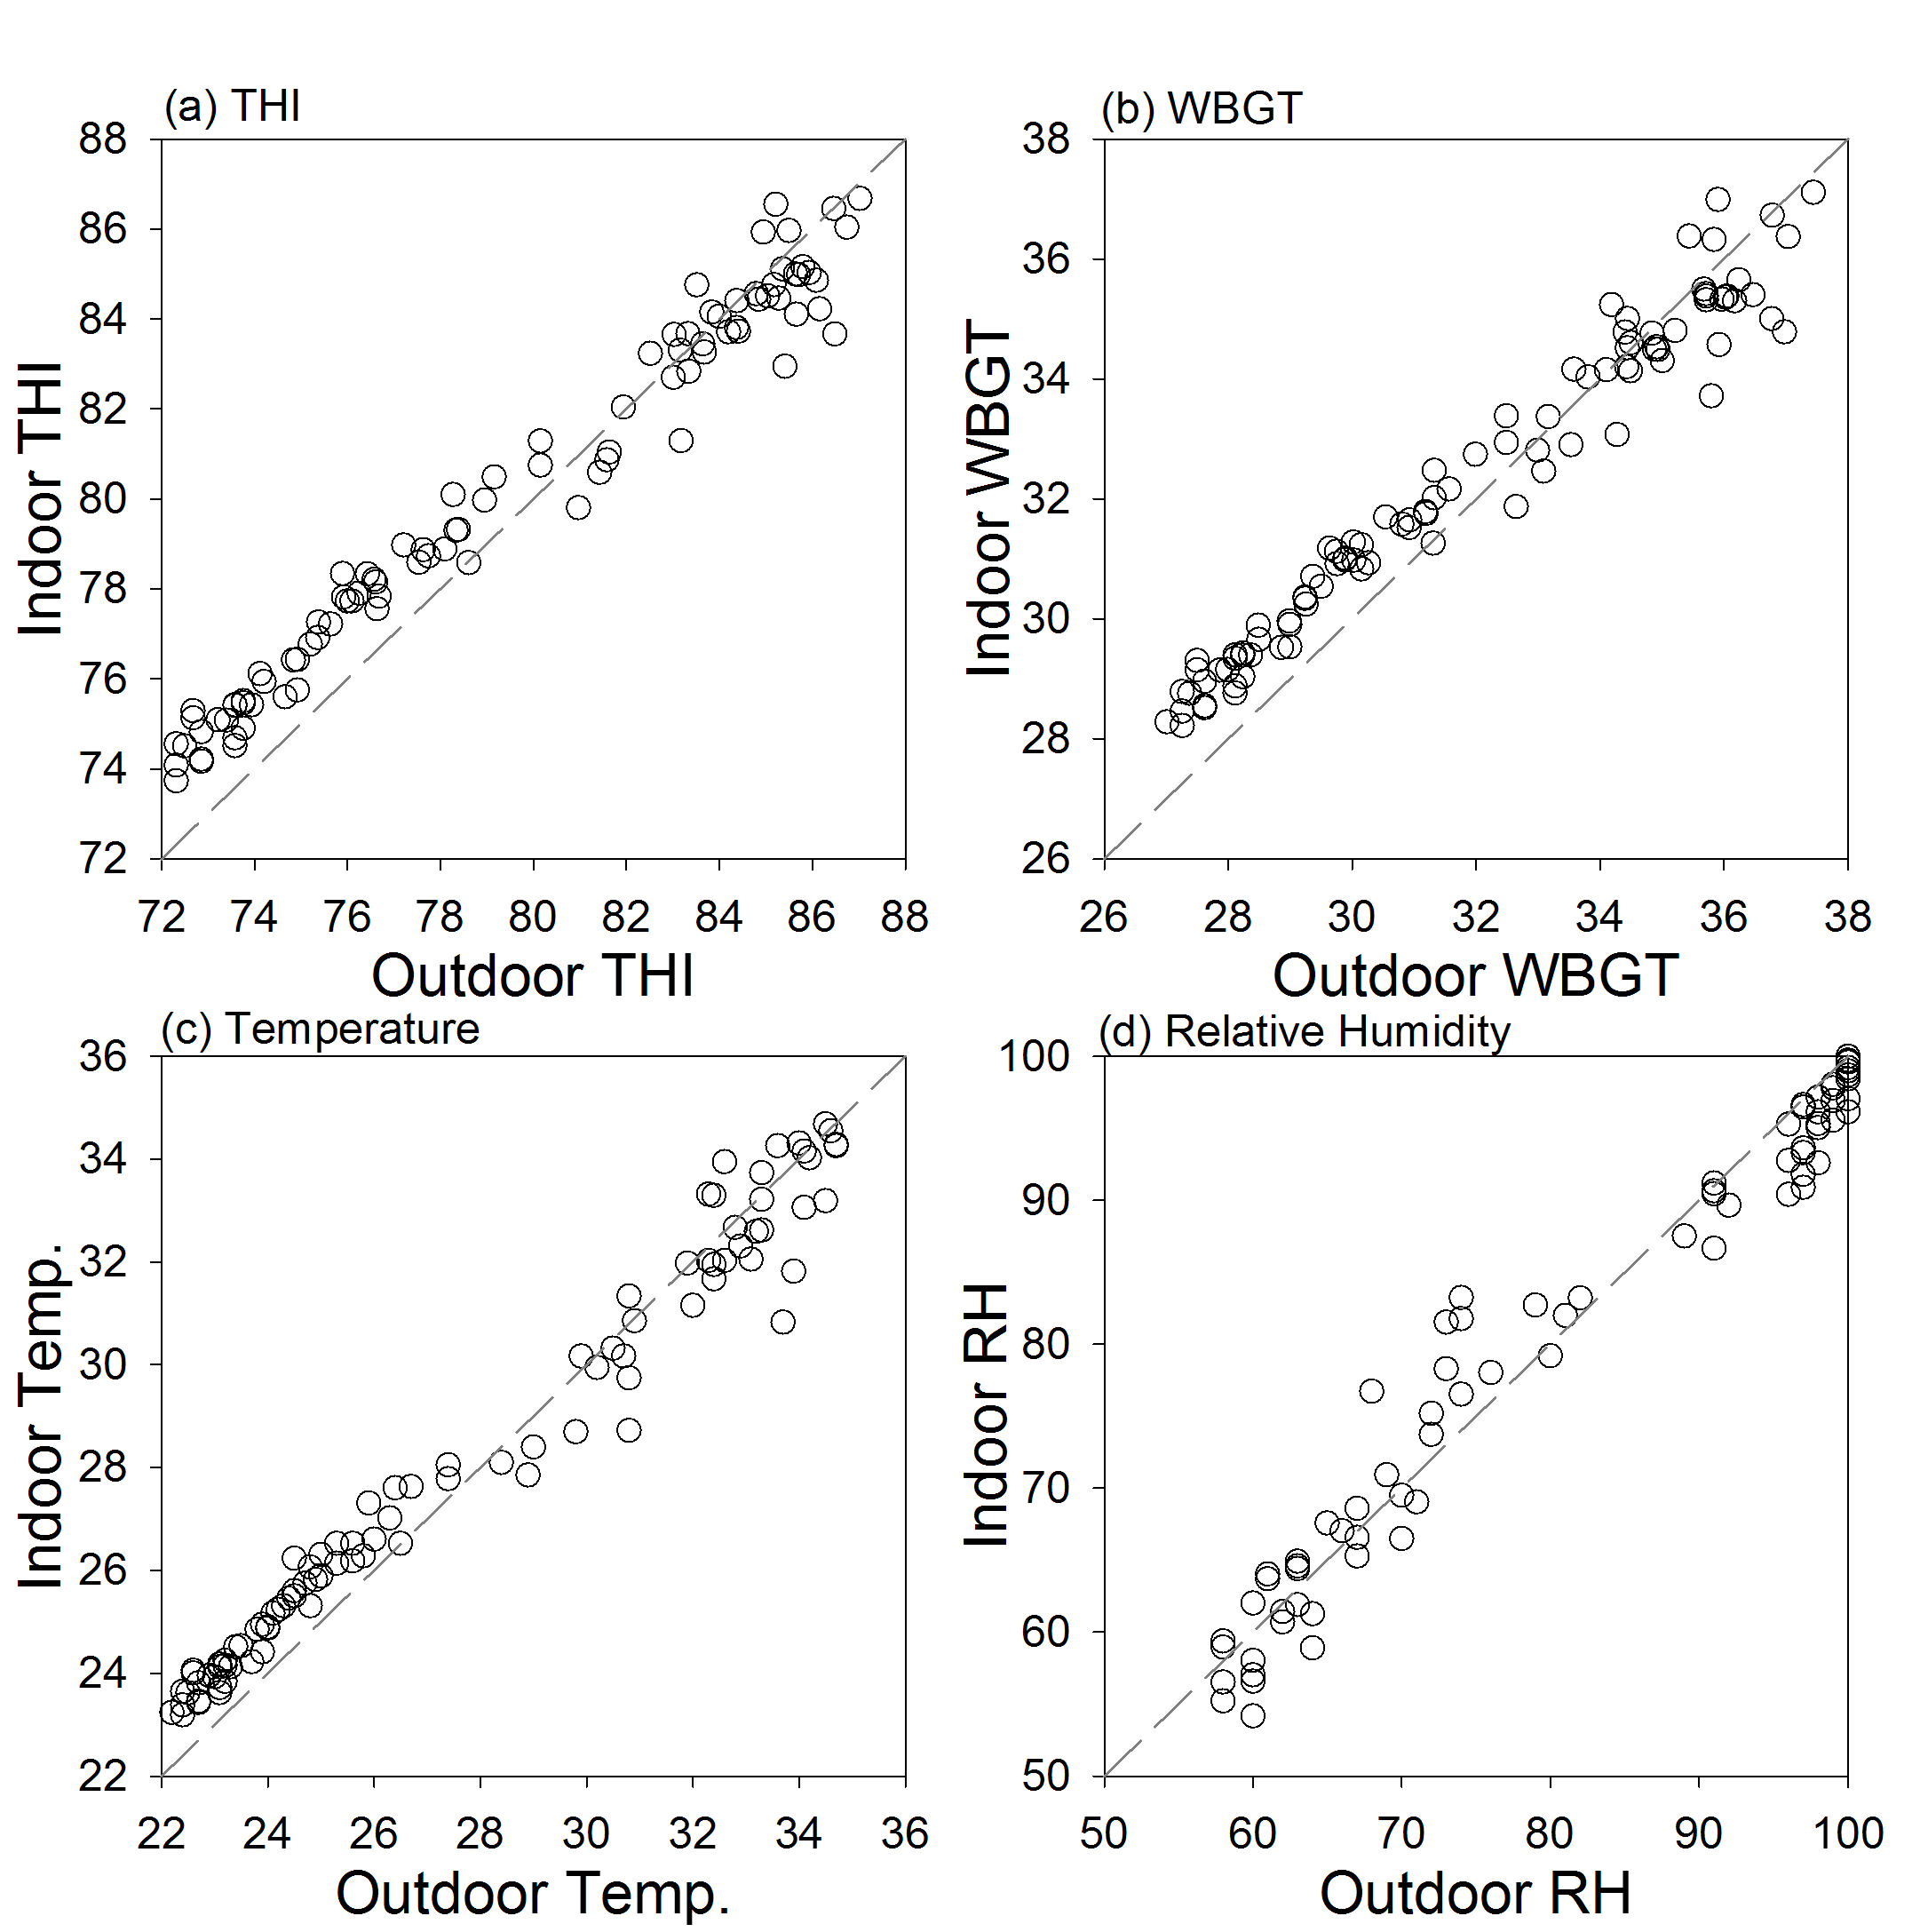 Fig. 3.4.6. Same as Fig. 3.4.5, but for shown as scatter plots.